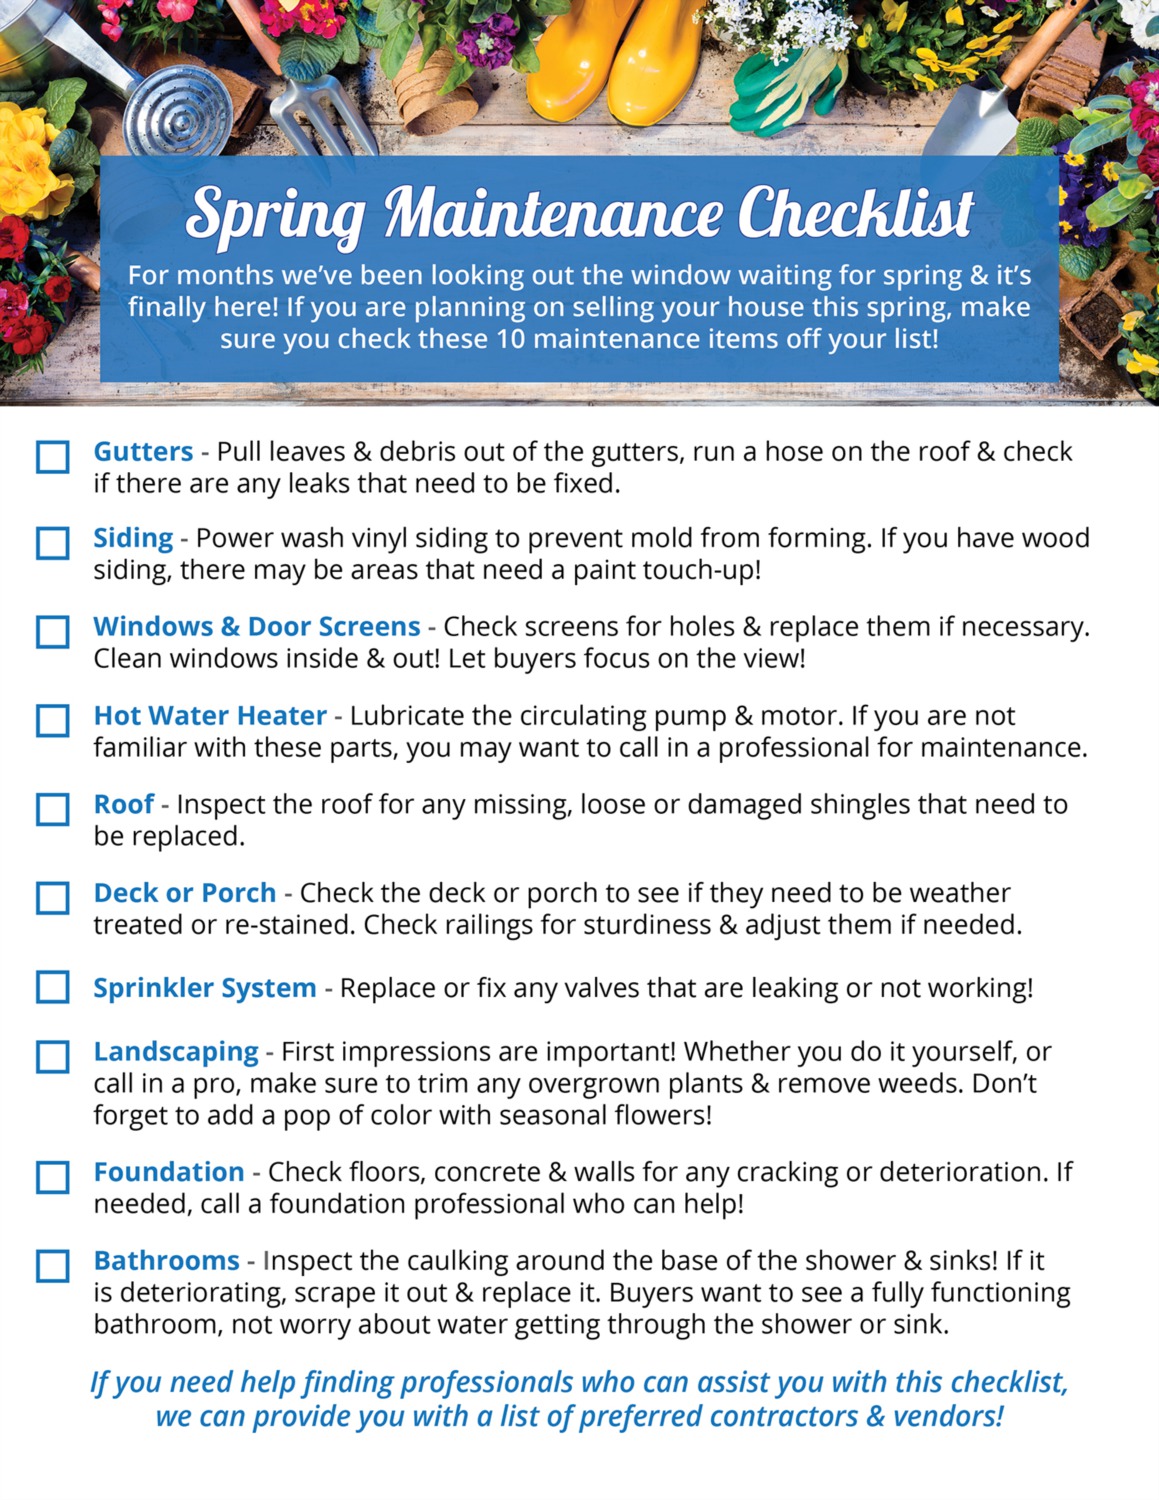 taste of home spring cleaning checklist